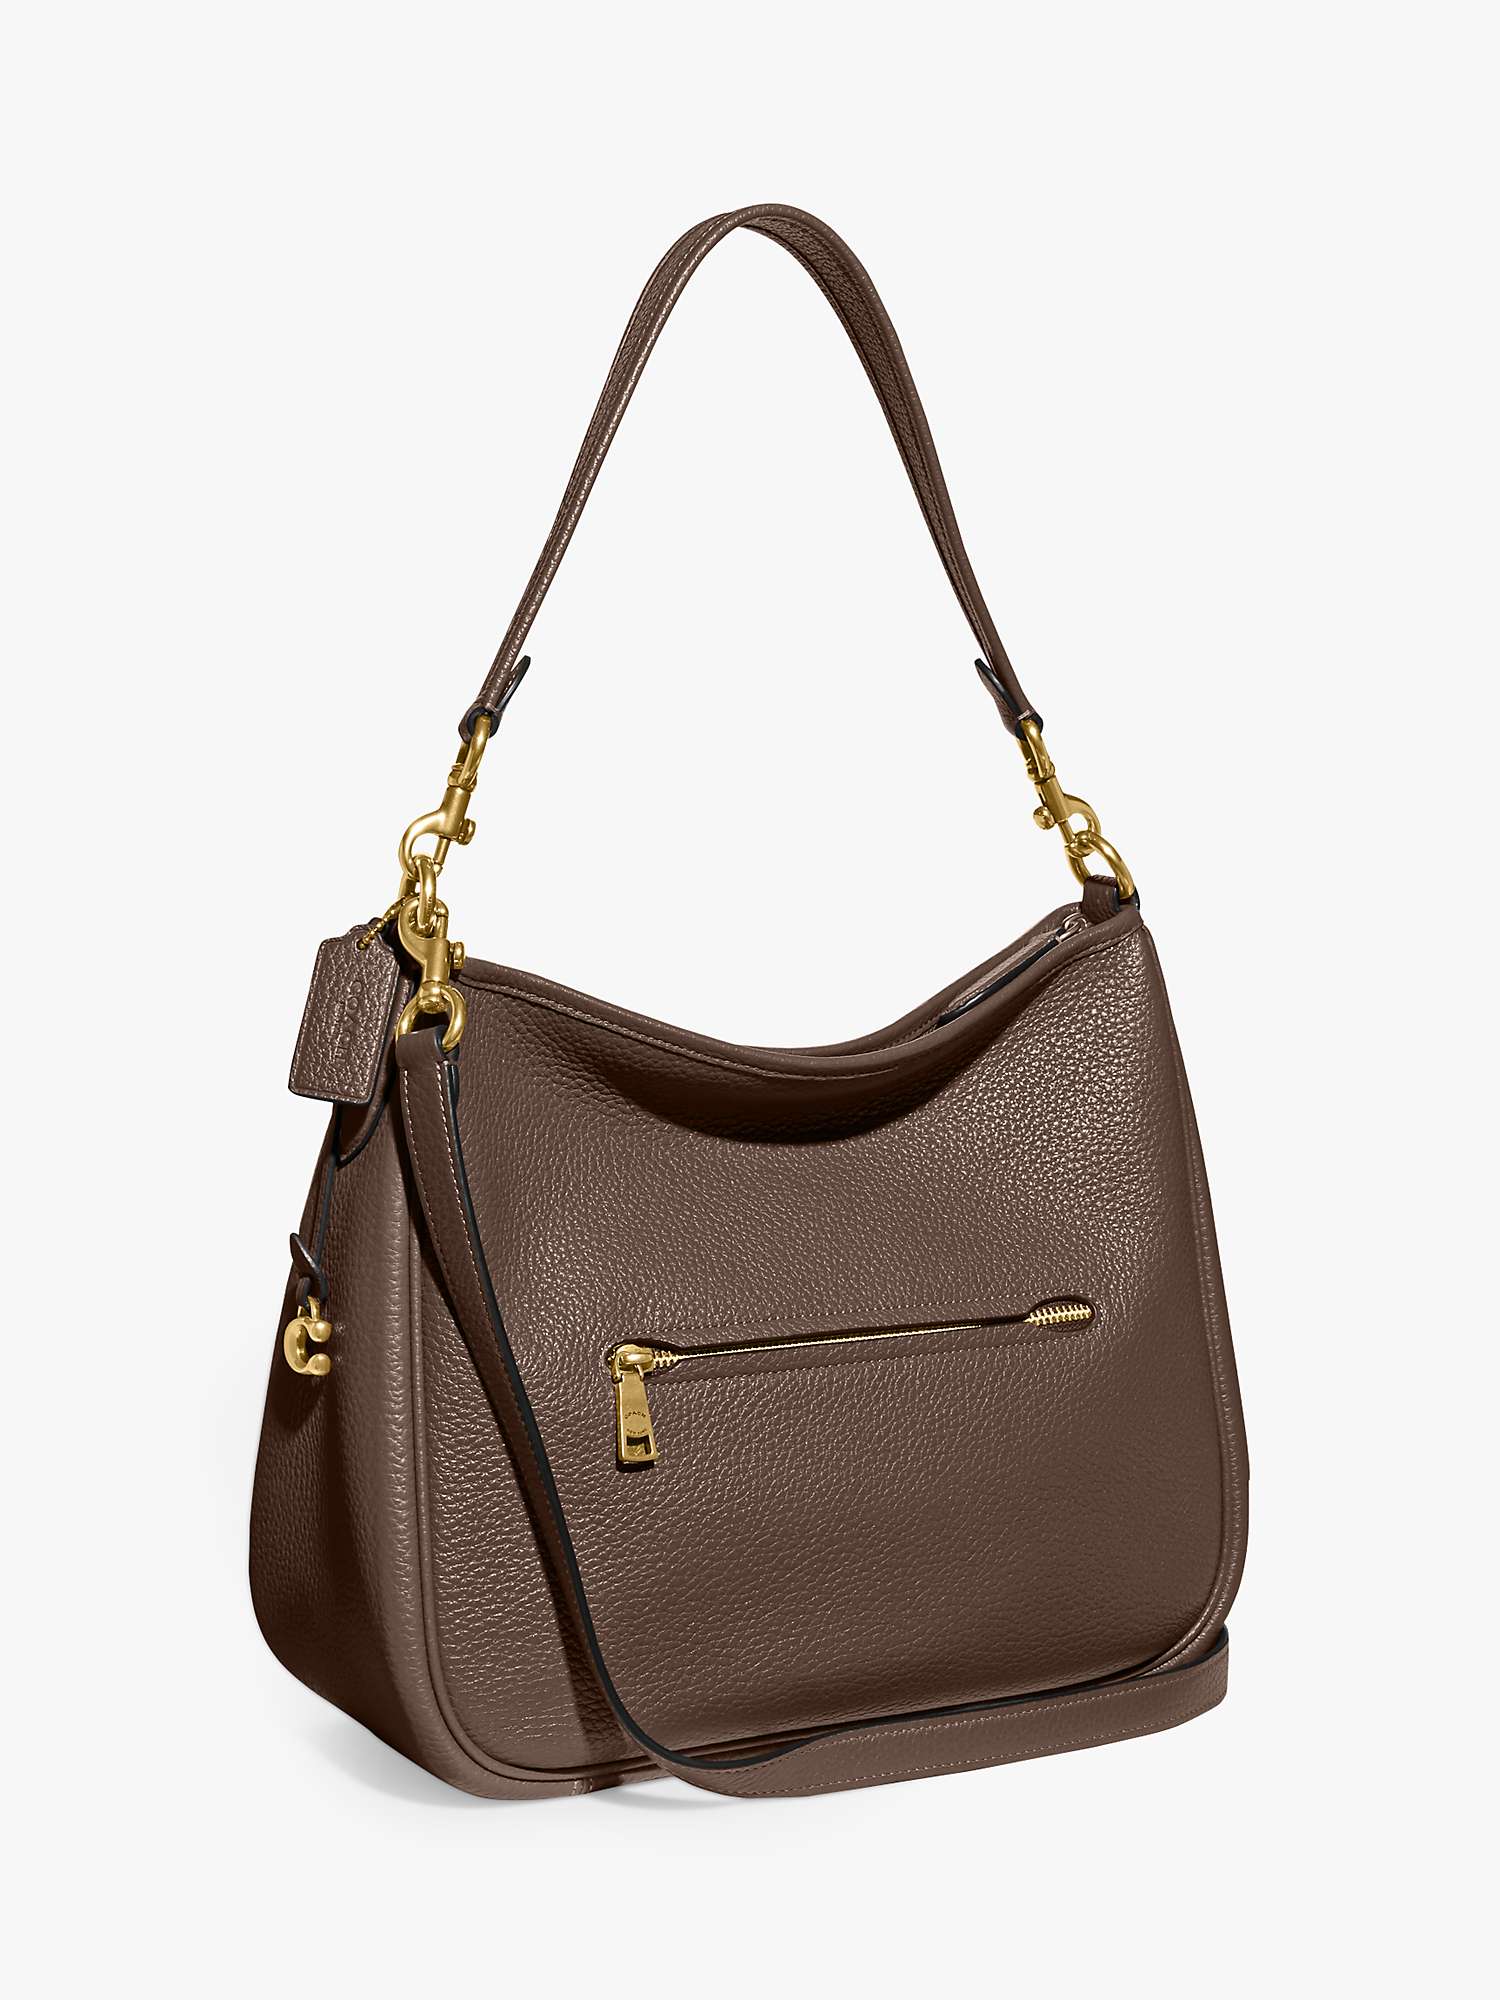 Coach Cary Leather Shoulder Bag, Dark Stone at John Lewis & Partners